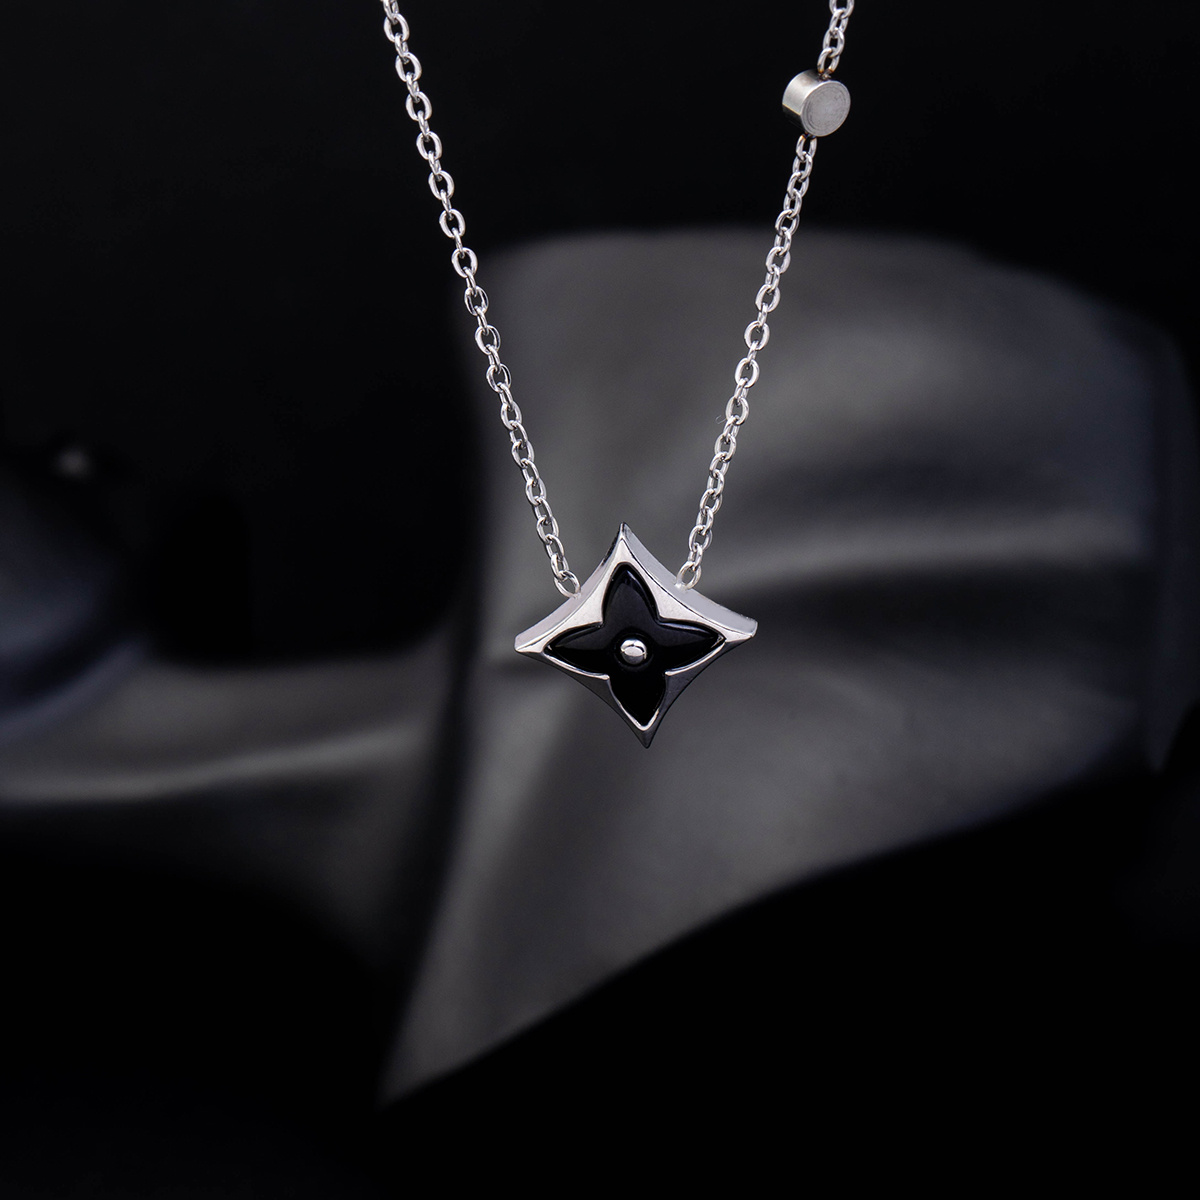 Black Clover Necklace  Clover necklace, Fashion jewelry, Fashion  accessories